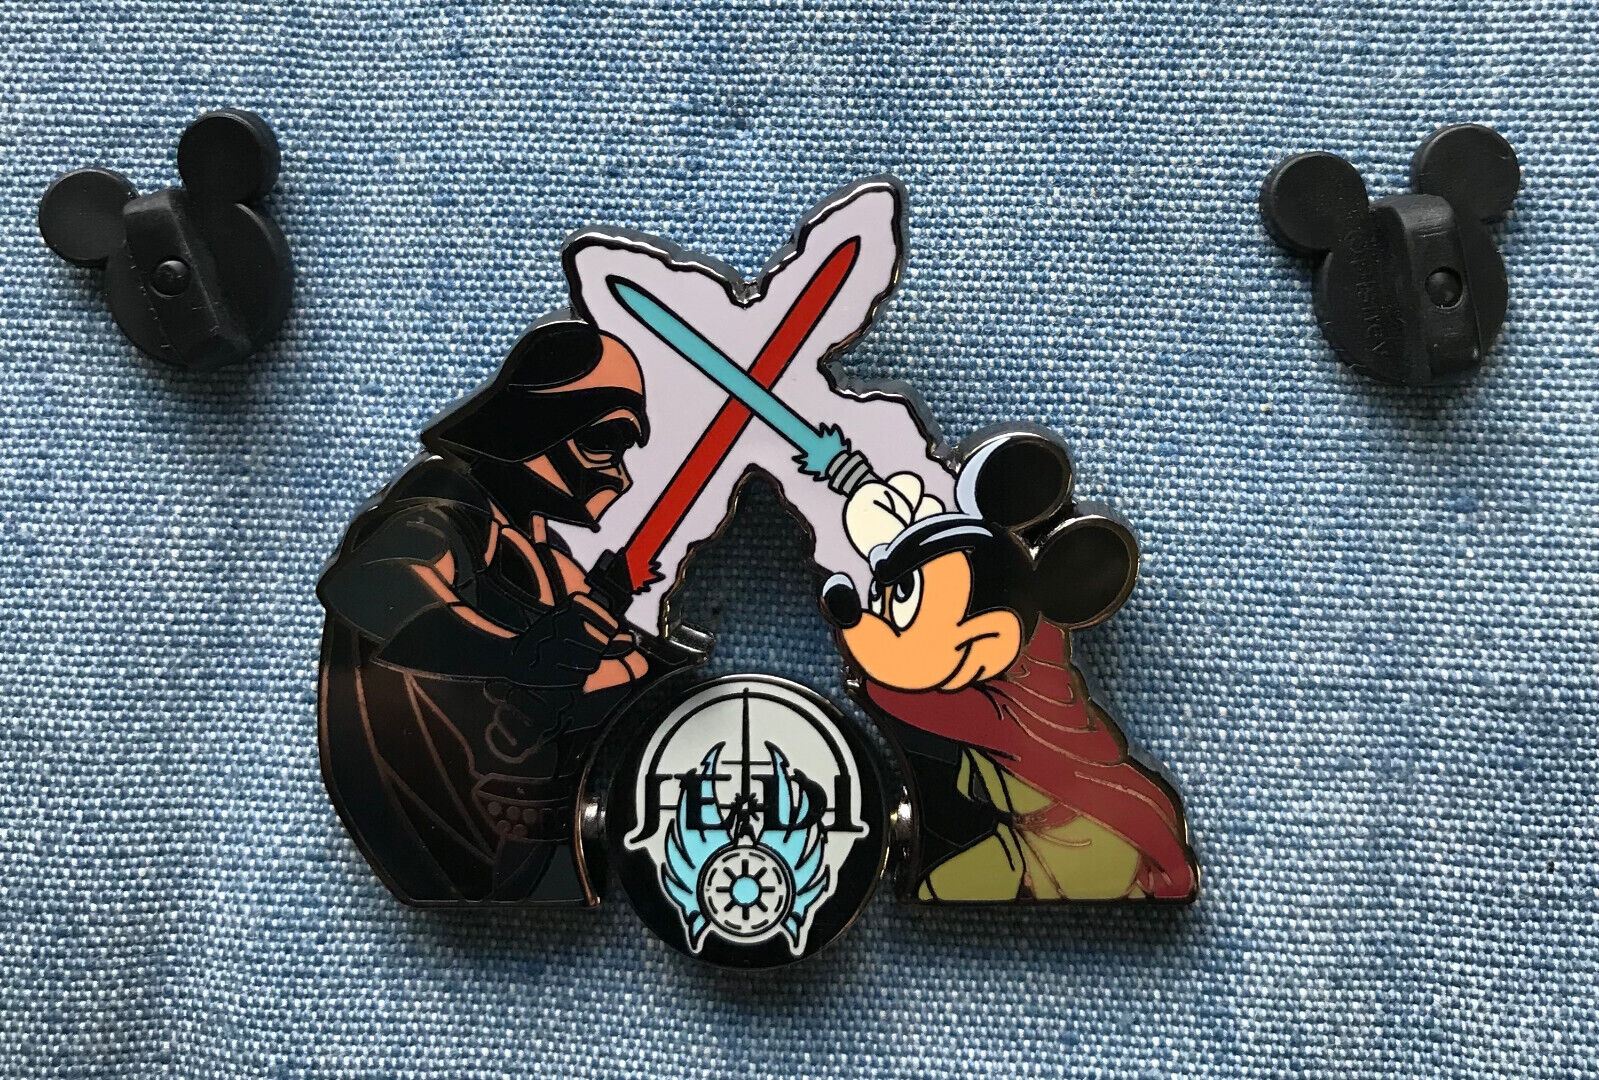 2008 Disney Star Wars Pin - Mickey Mouse Vs Darth Vader  - Spinning Jedi Or Sith